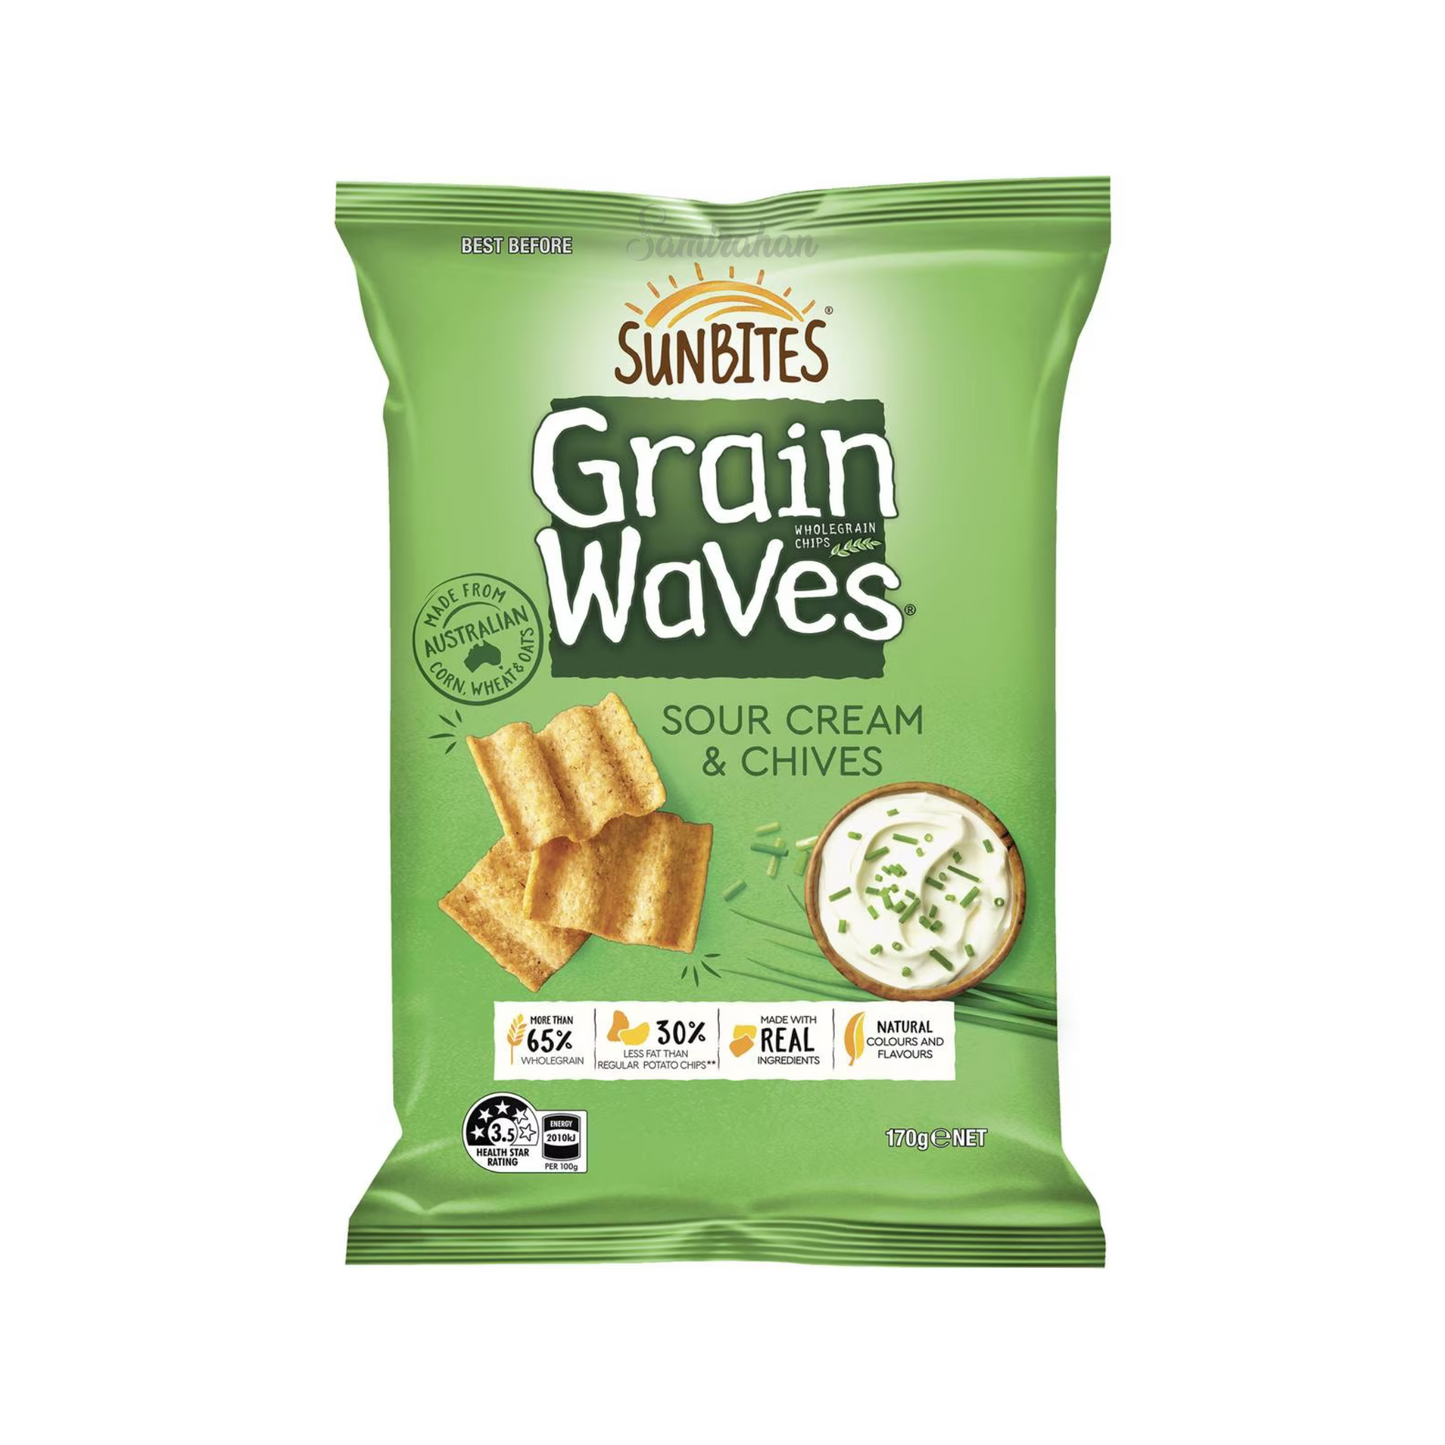 Sunbites Grain Waves Wholegrain Chips Sour Cream & Chives are great tasting Aussie chips made with only real ingredients & packed full of real flavour. No artificial colours, flavours or added MSG. Halal suitable. Best genuine imported foreign uncommon delicious premium snacks alu chip cheap price in Dhaka Bangladesh.